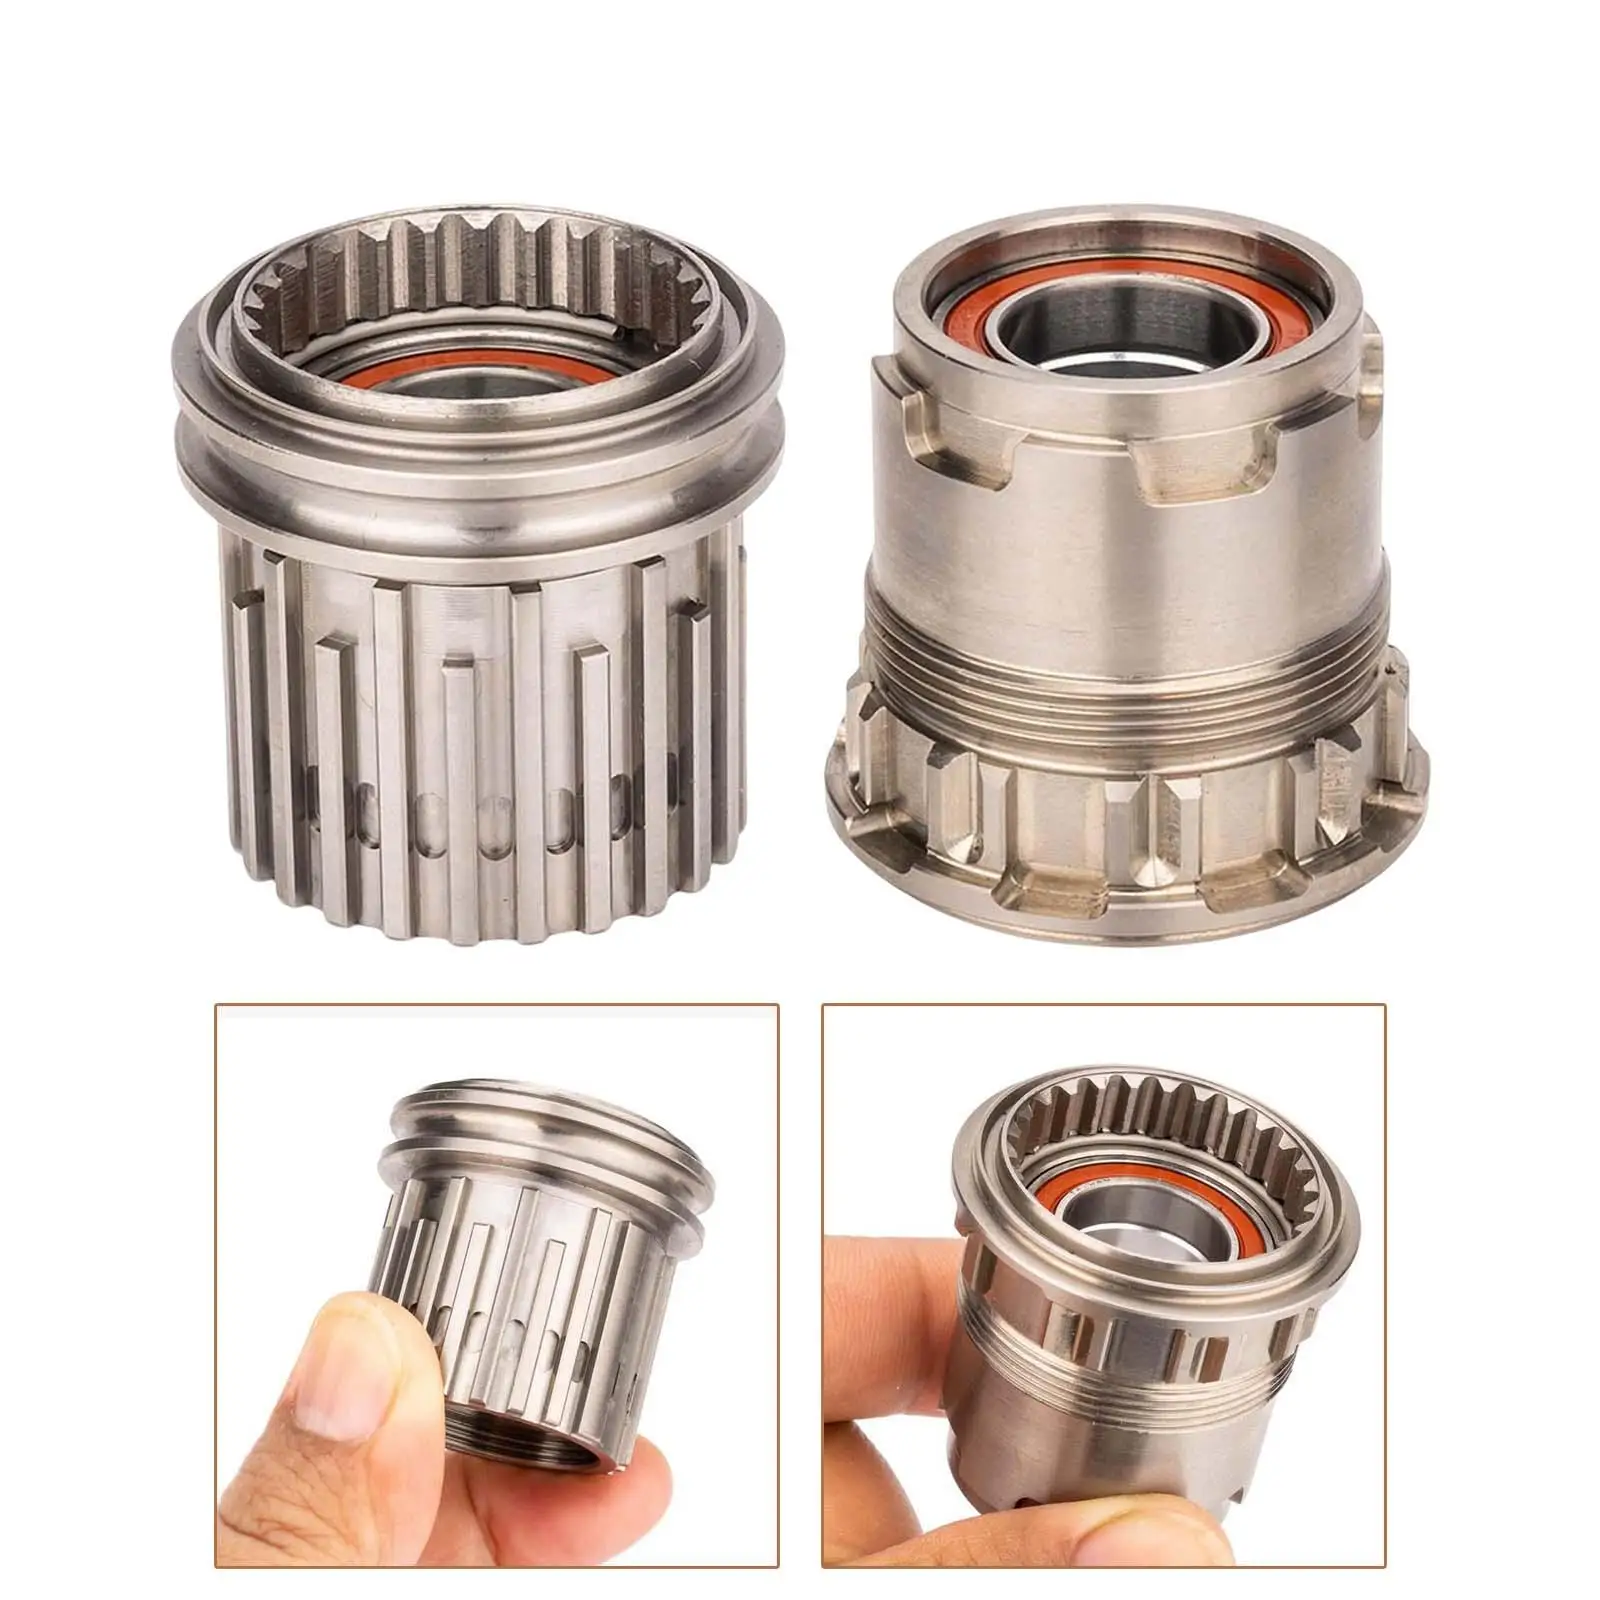 Reliable Bike Freehub Body Bearing 12 Speed Ratchet Driver Durable Hub Driver Adapter Components Parts Cycling Accessories